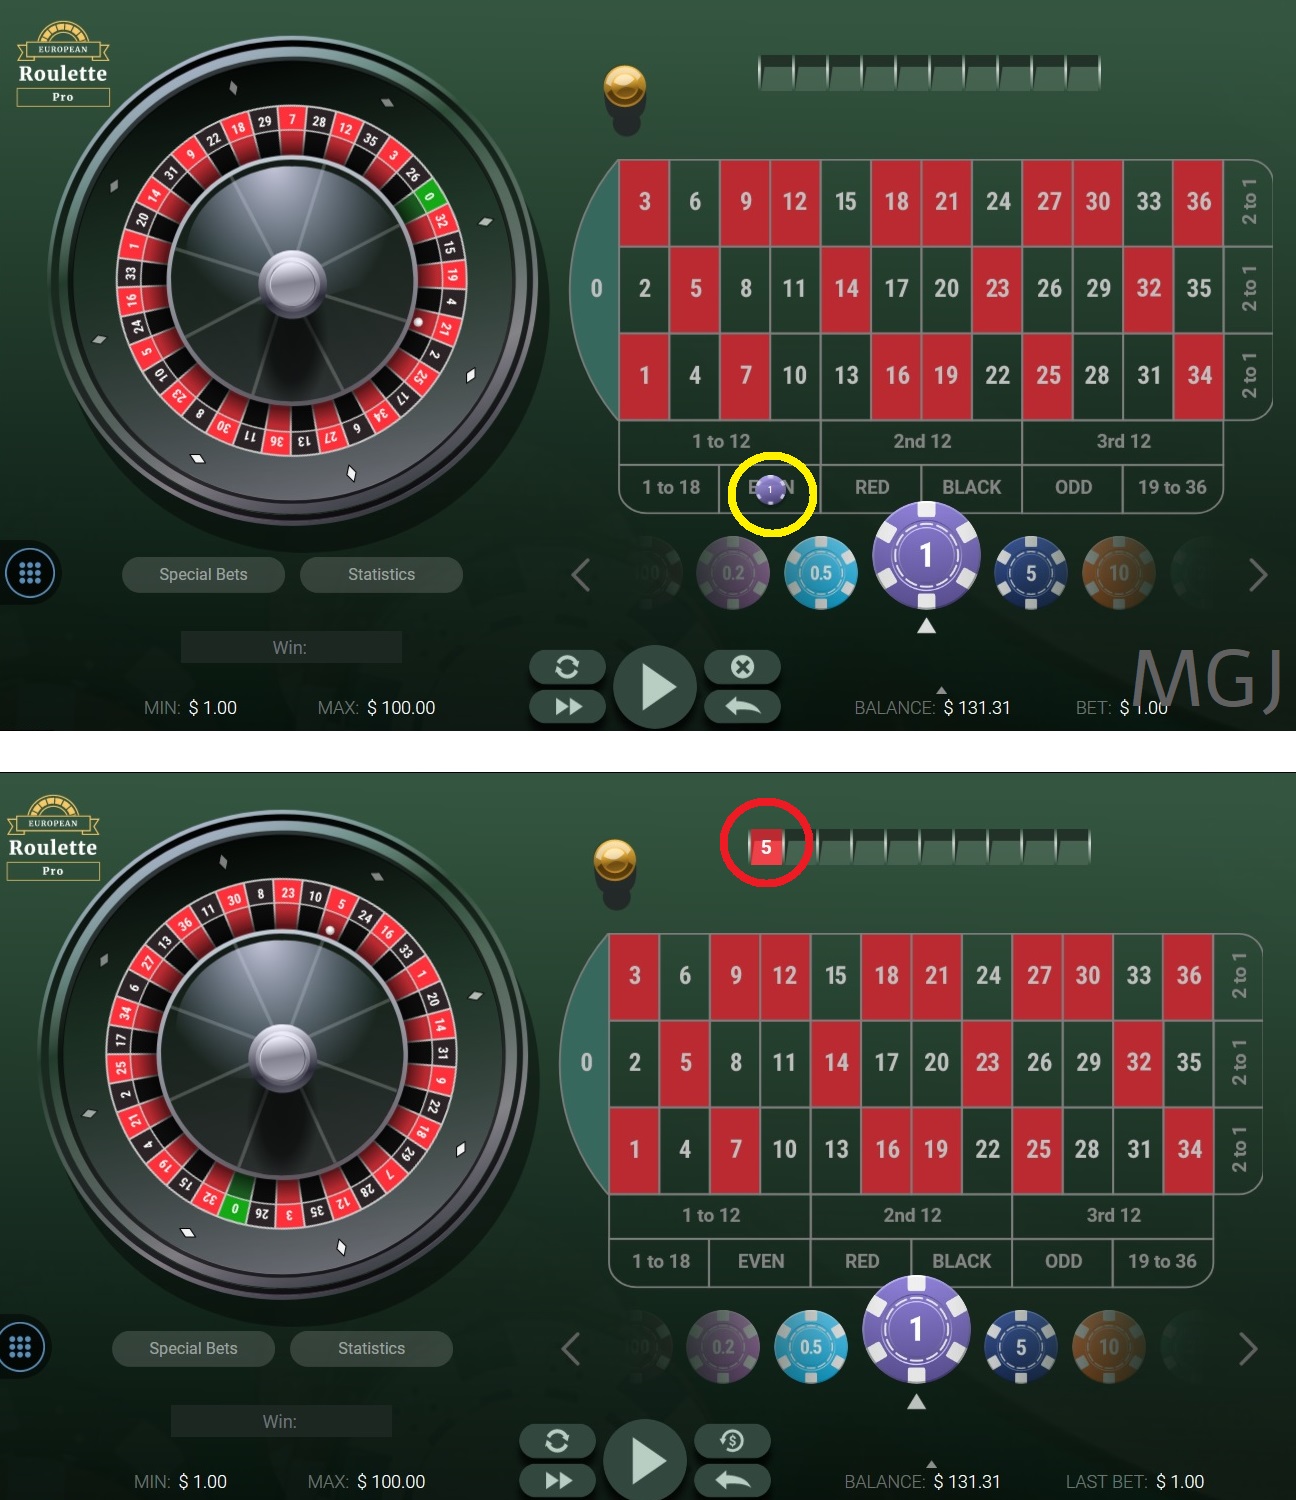 Online Roulette - European Roulette Pro - GVG - Screenshot - First Bet - MGJ